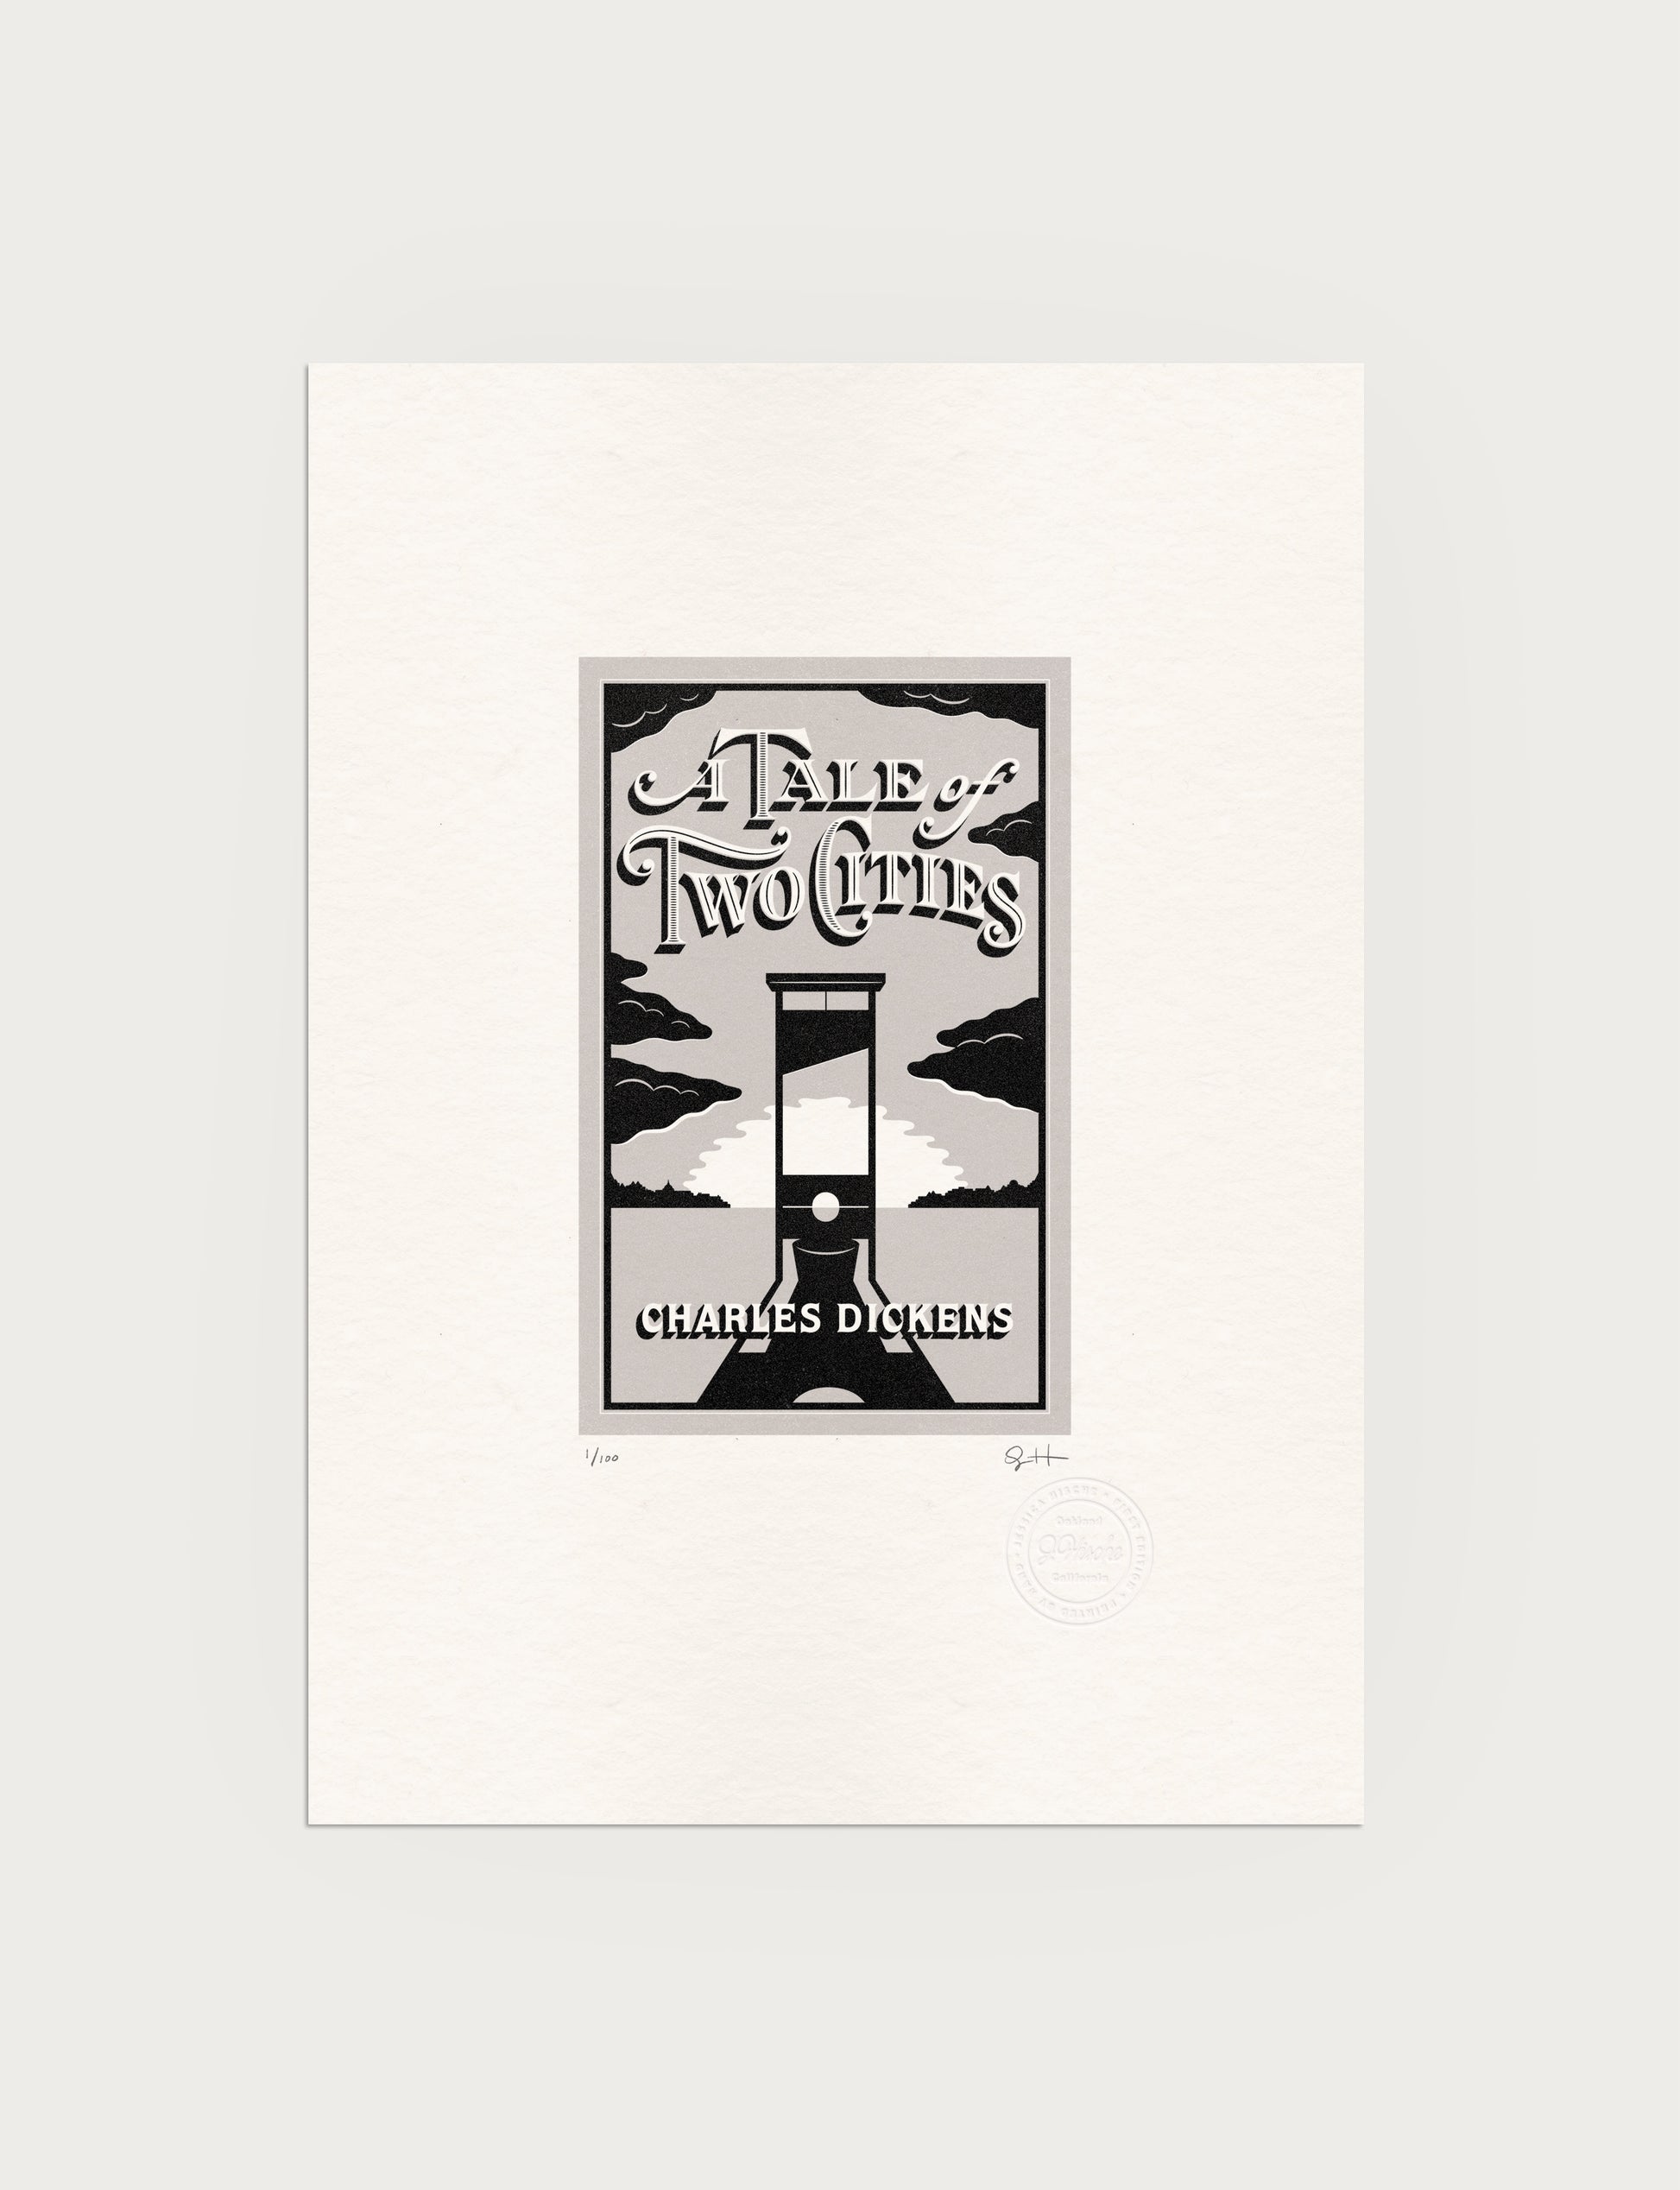 2-color letterpress print in gray and black. Printed artwork is an illustrated book cover of A Tale of Two Cities including custom hand lettering.